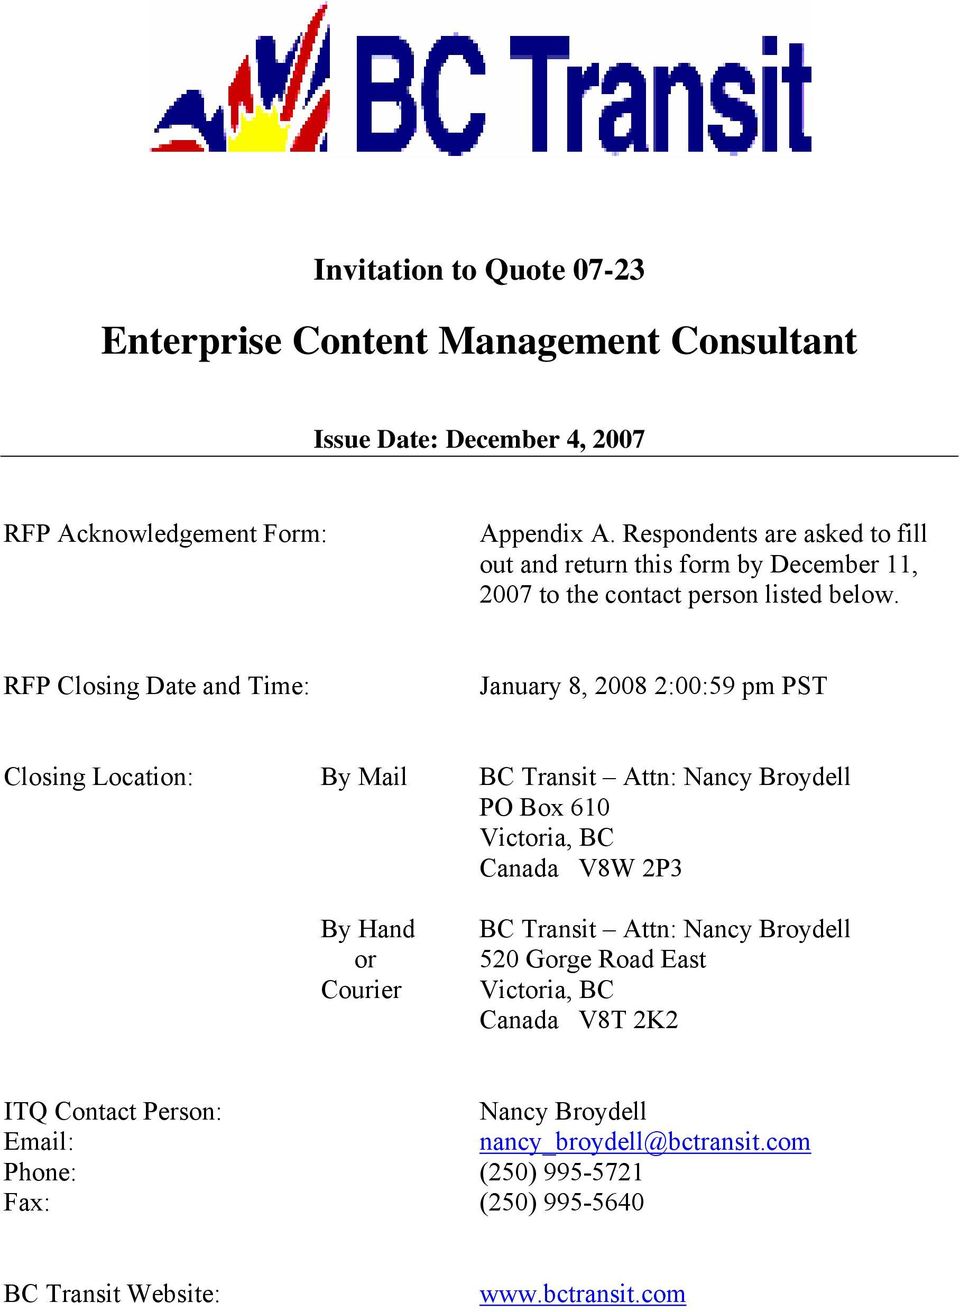 RFP Closing Date and Time: January 8, 2008 2:00:59 pm PST Closing Location: By Mail BC Transit Attn: Nancy Broydell PO Box 610 Victoria, BC Canada V8W 2P3 By Hand